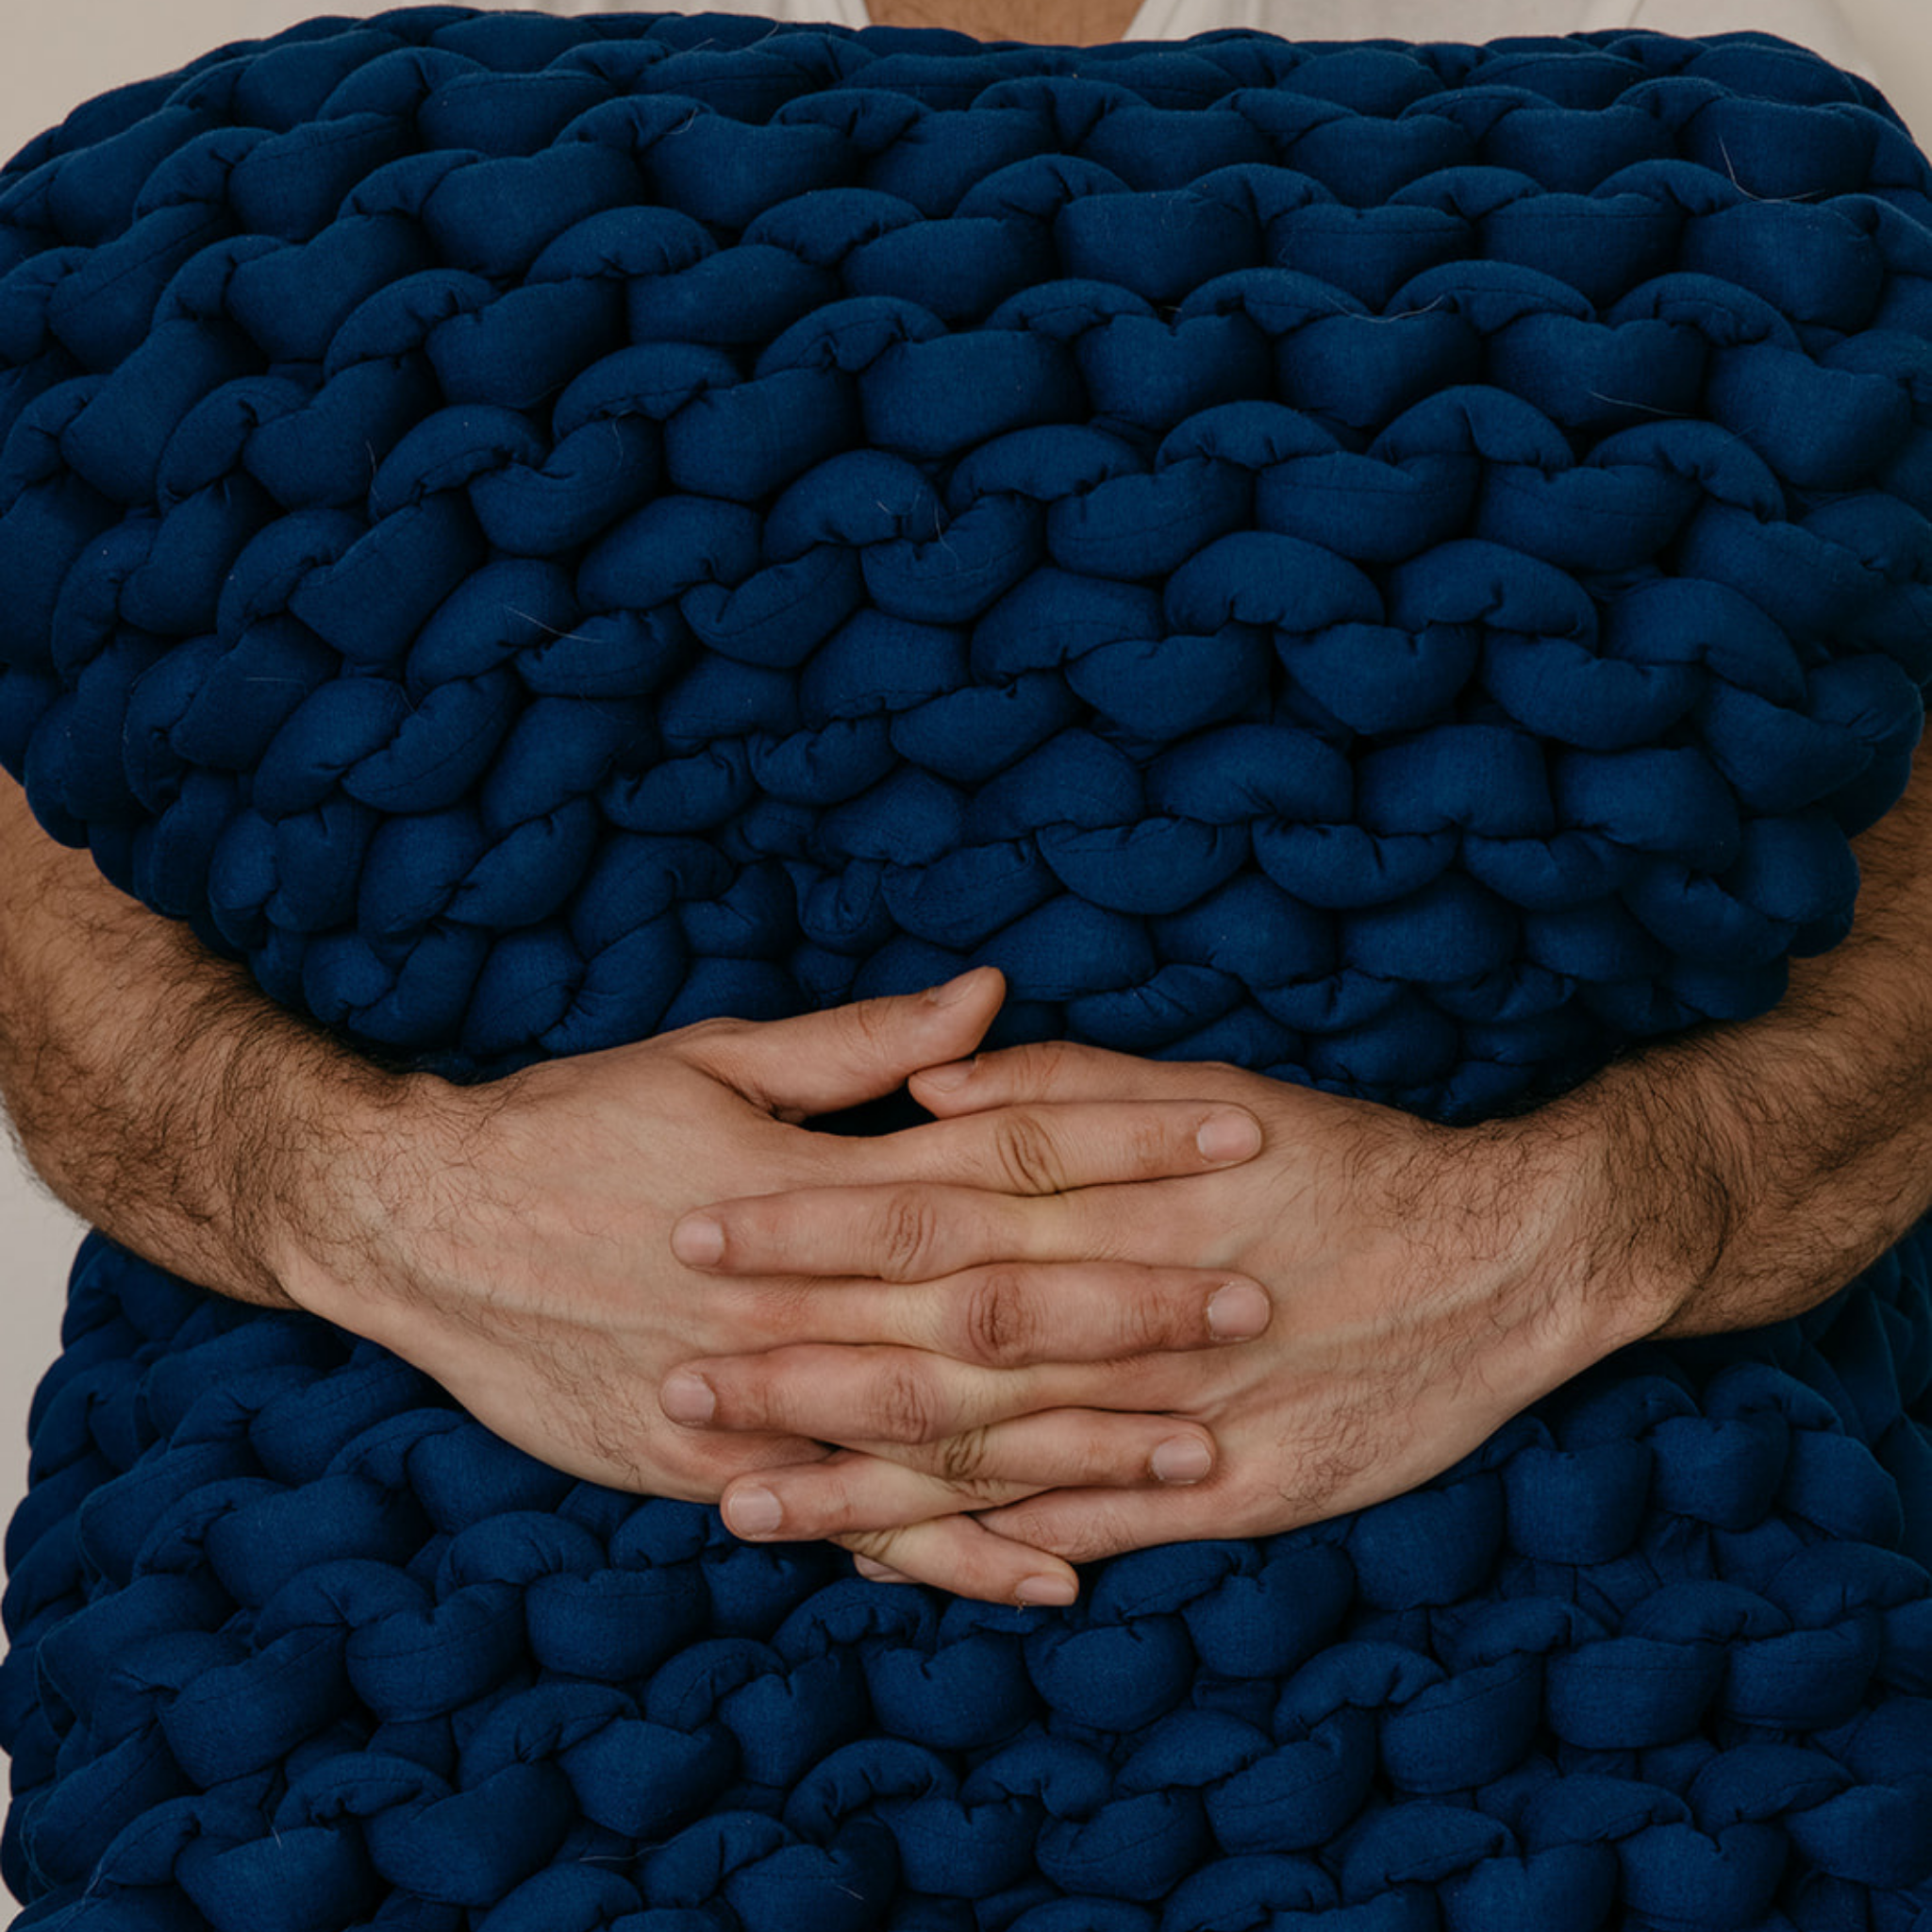 Polypropylene Pellets Stuffing Material is Safe, Durable, Easy to Use -  Mosaic Weighted Blankets